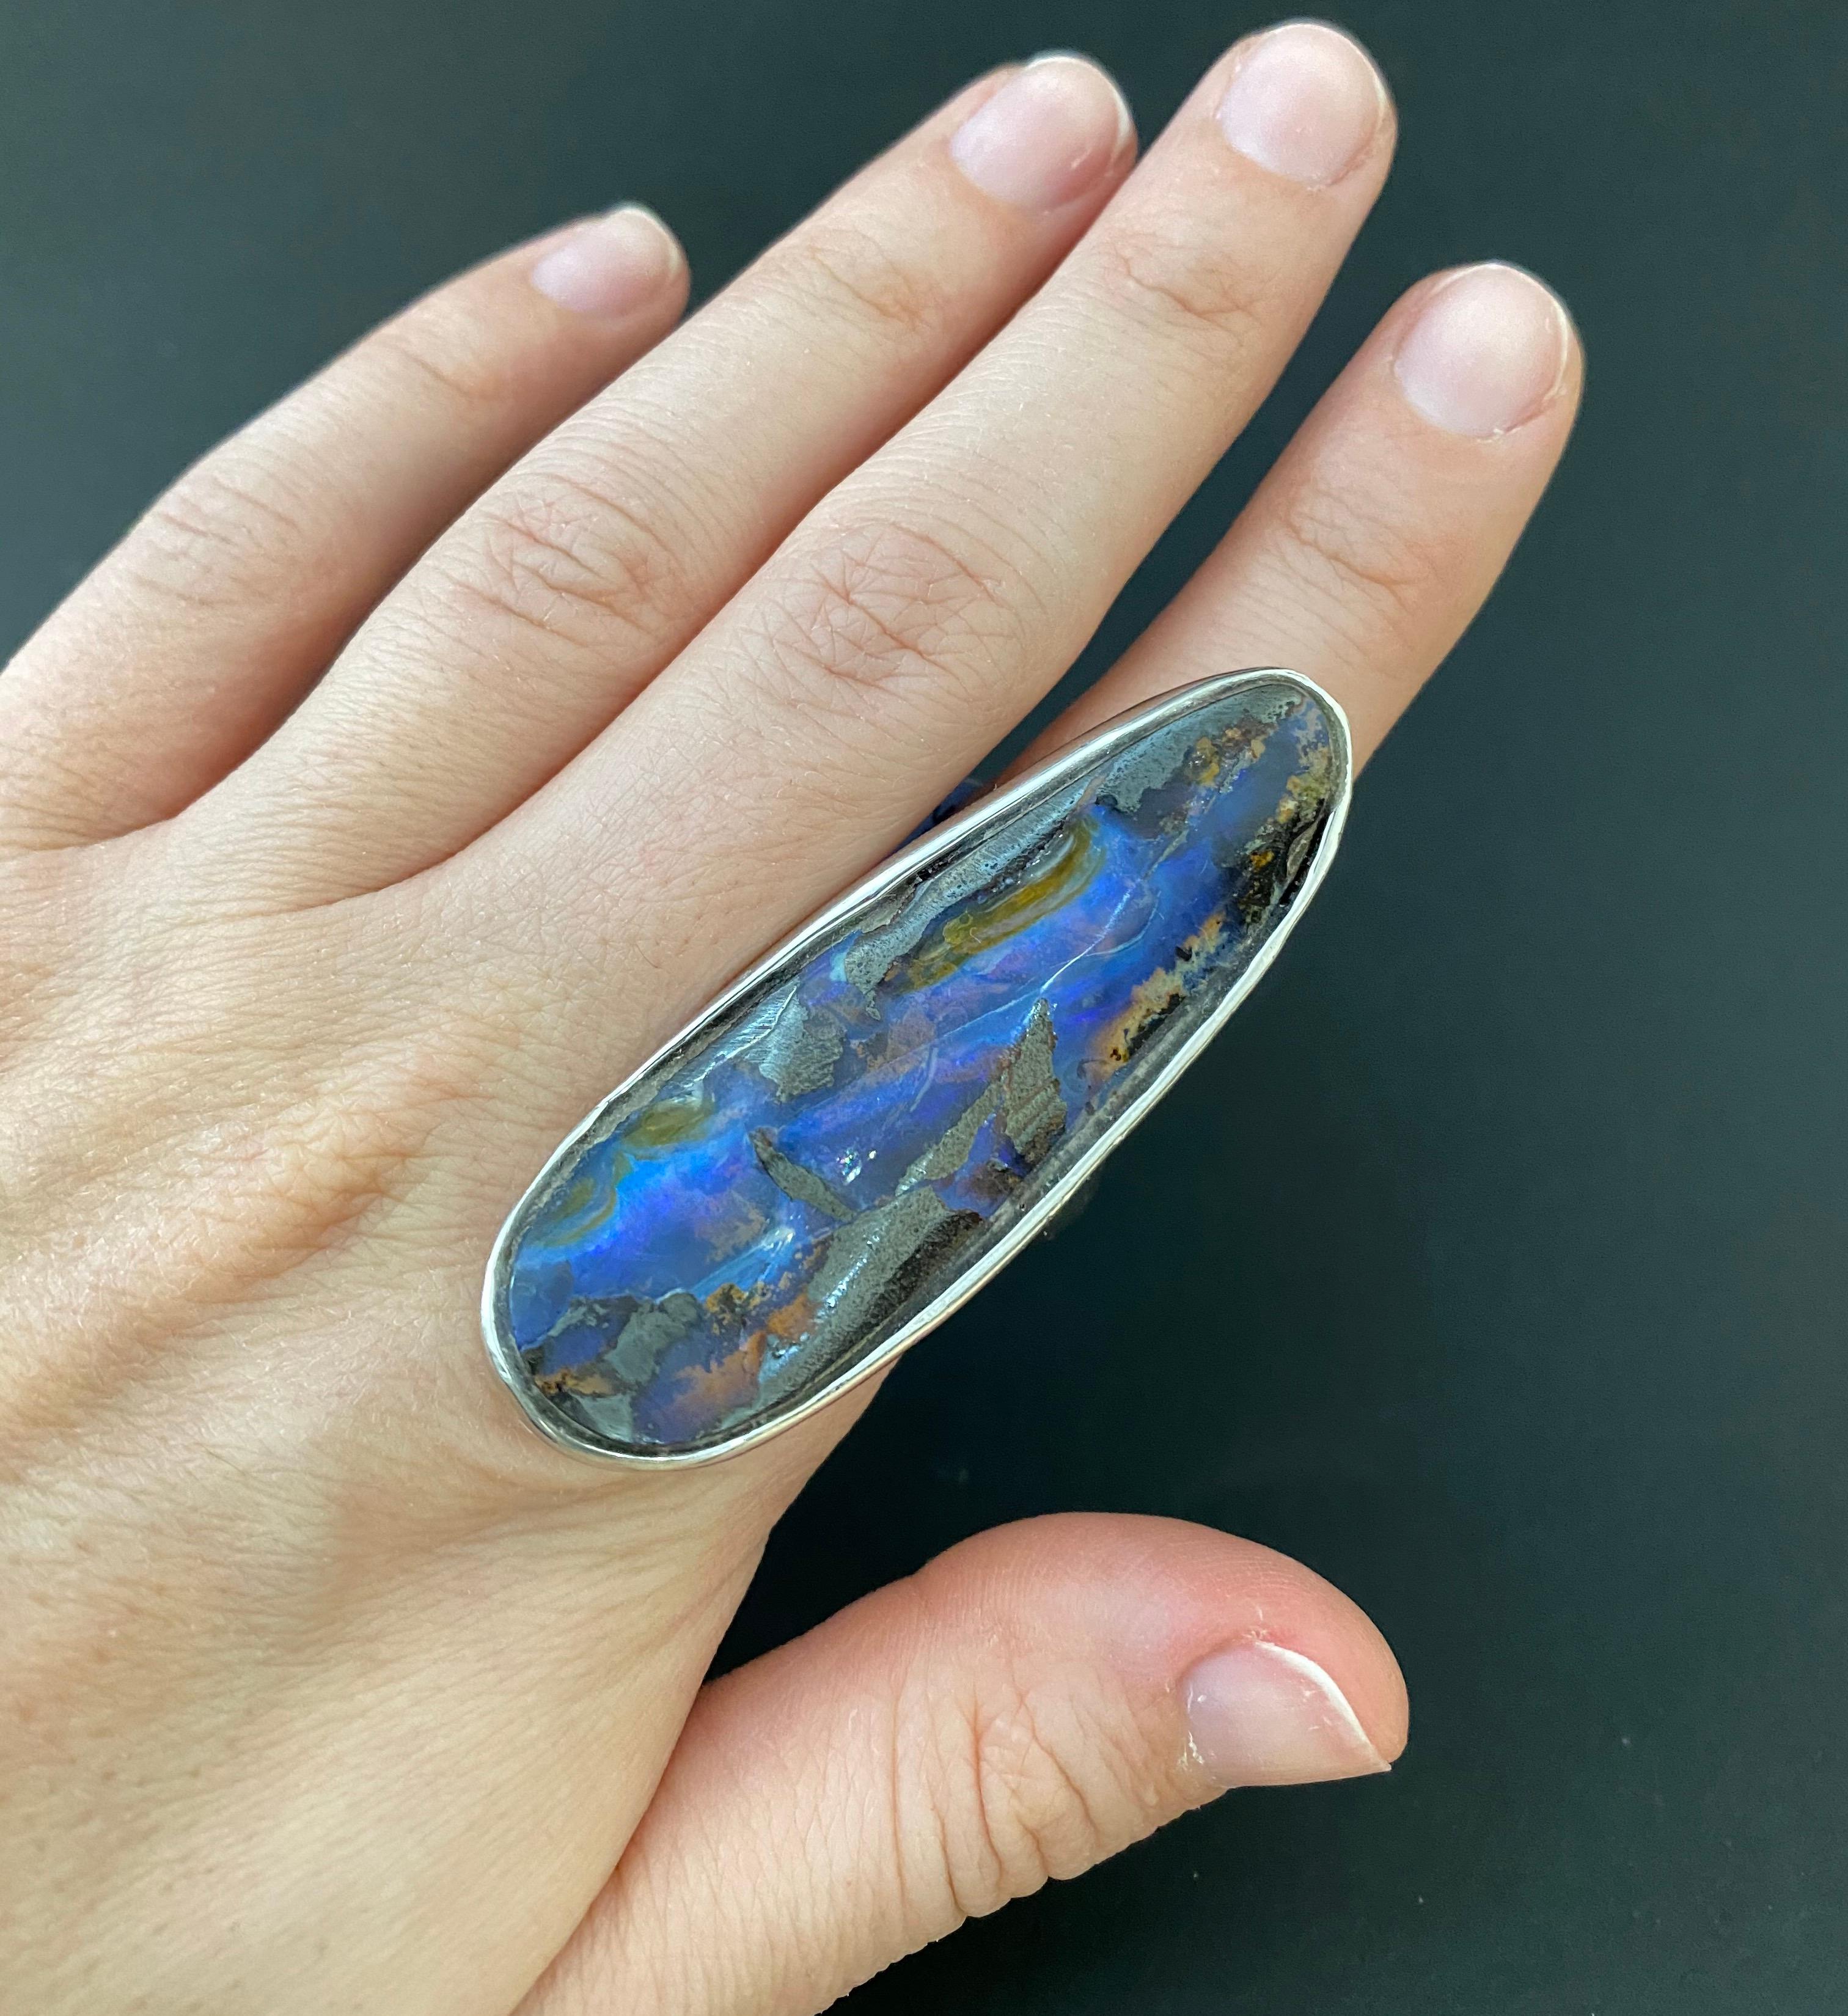 Material: Silver
Gemstone: 1 Opal at 62.77 Carats.
Ring Size: 6.5 Alberto offers complimentary sizing on all rings.
This piece measures approximately 55 x 22 millimeters.
Fine one-of-a-kind craftsmanship meets incredible quality in this breathtaking